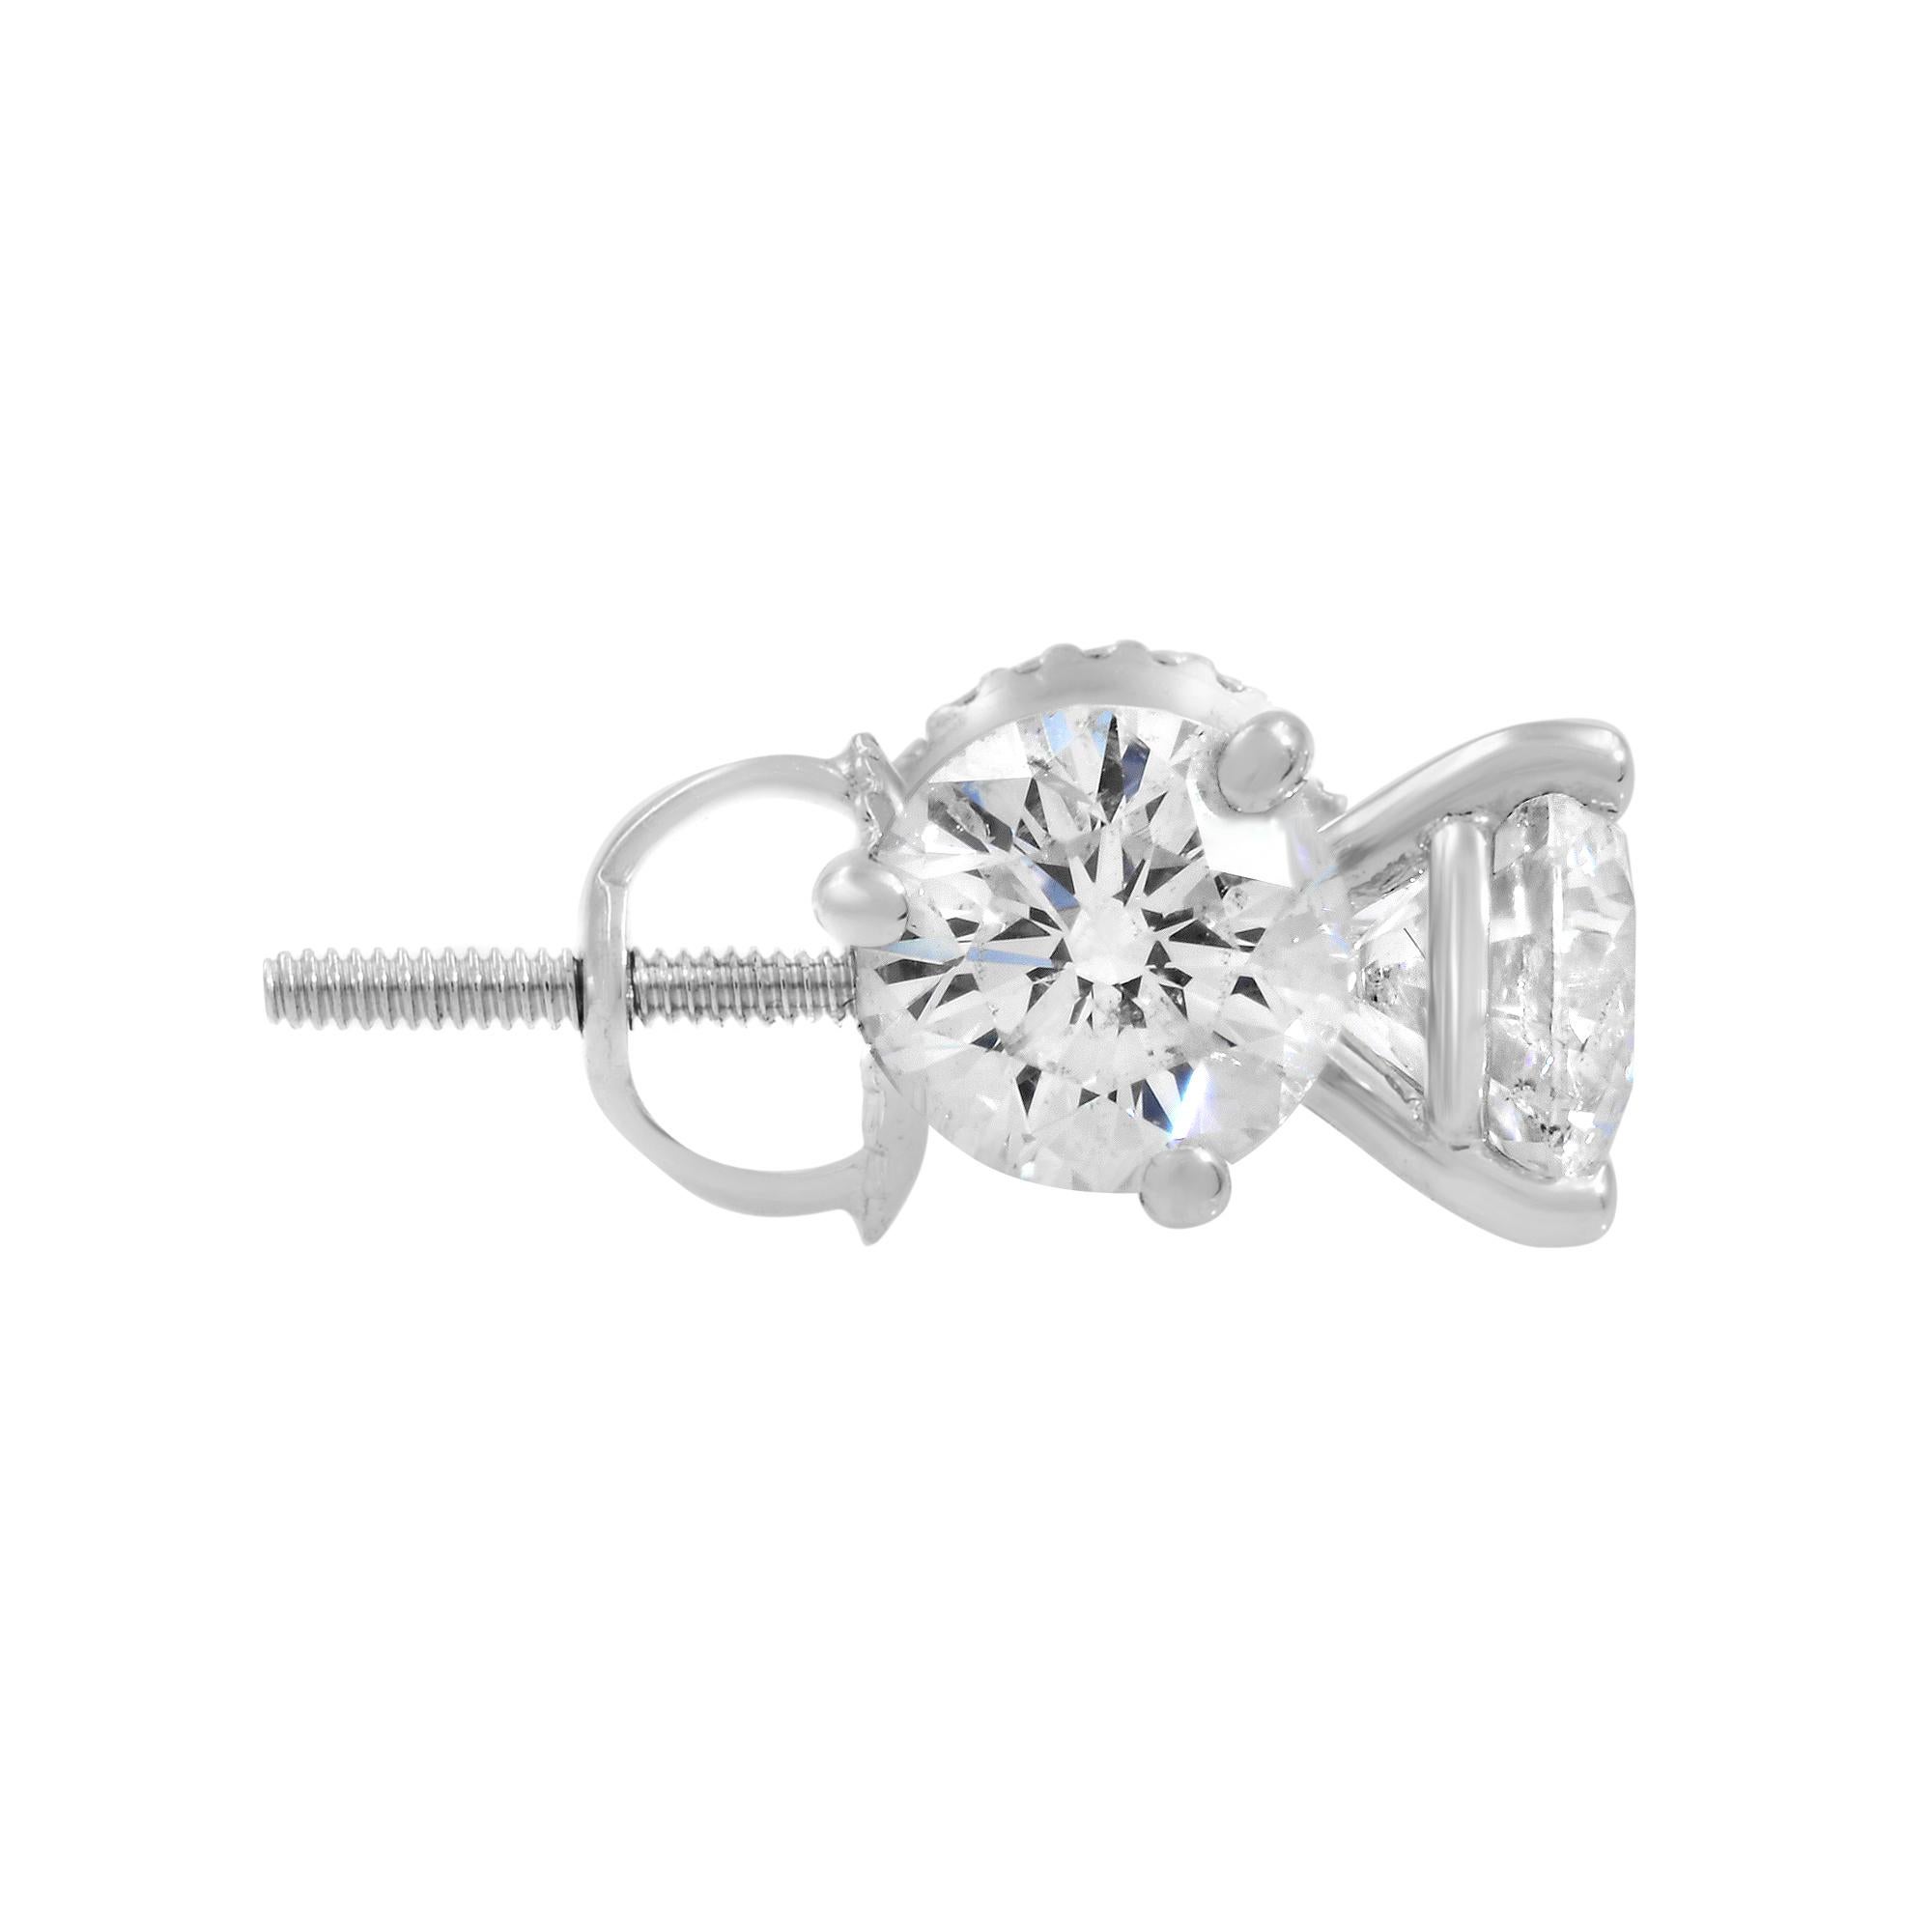 These round cut diamond stud earring are crafted in 14k white gold, set in iconic solitaire 3 prong settings casting. Each diamond is crafted to the highest standards and inscribed with an invisible mark of quality. Each diamond is 0.75 carat. Total